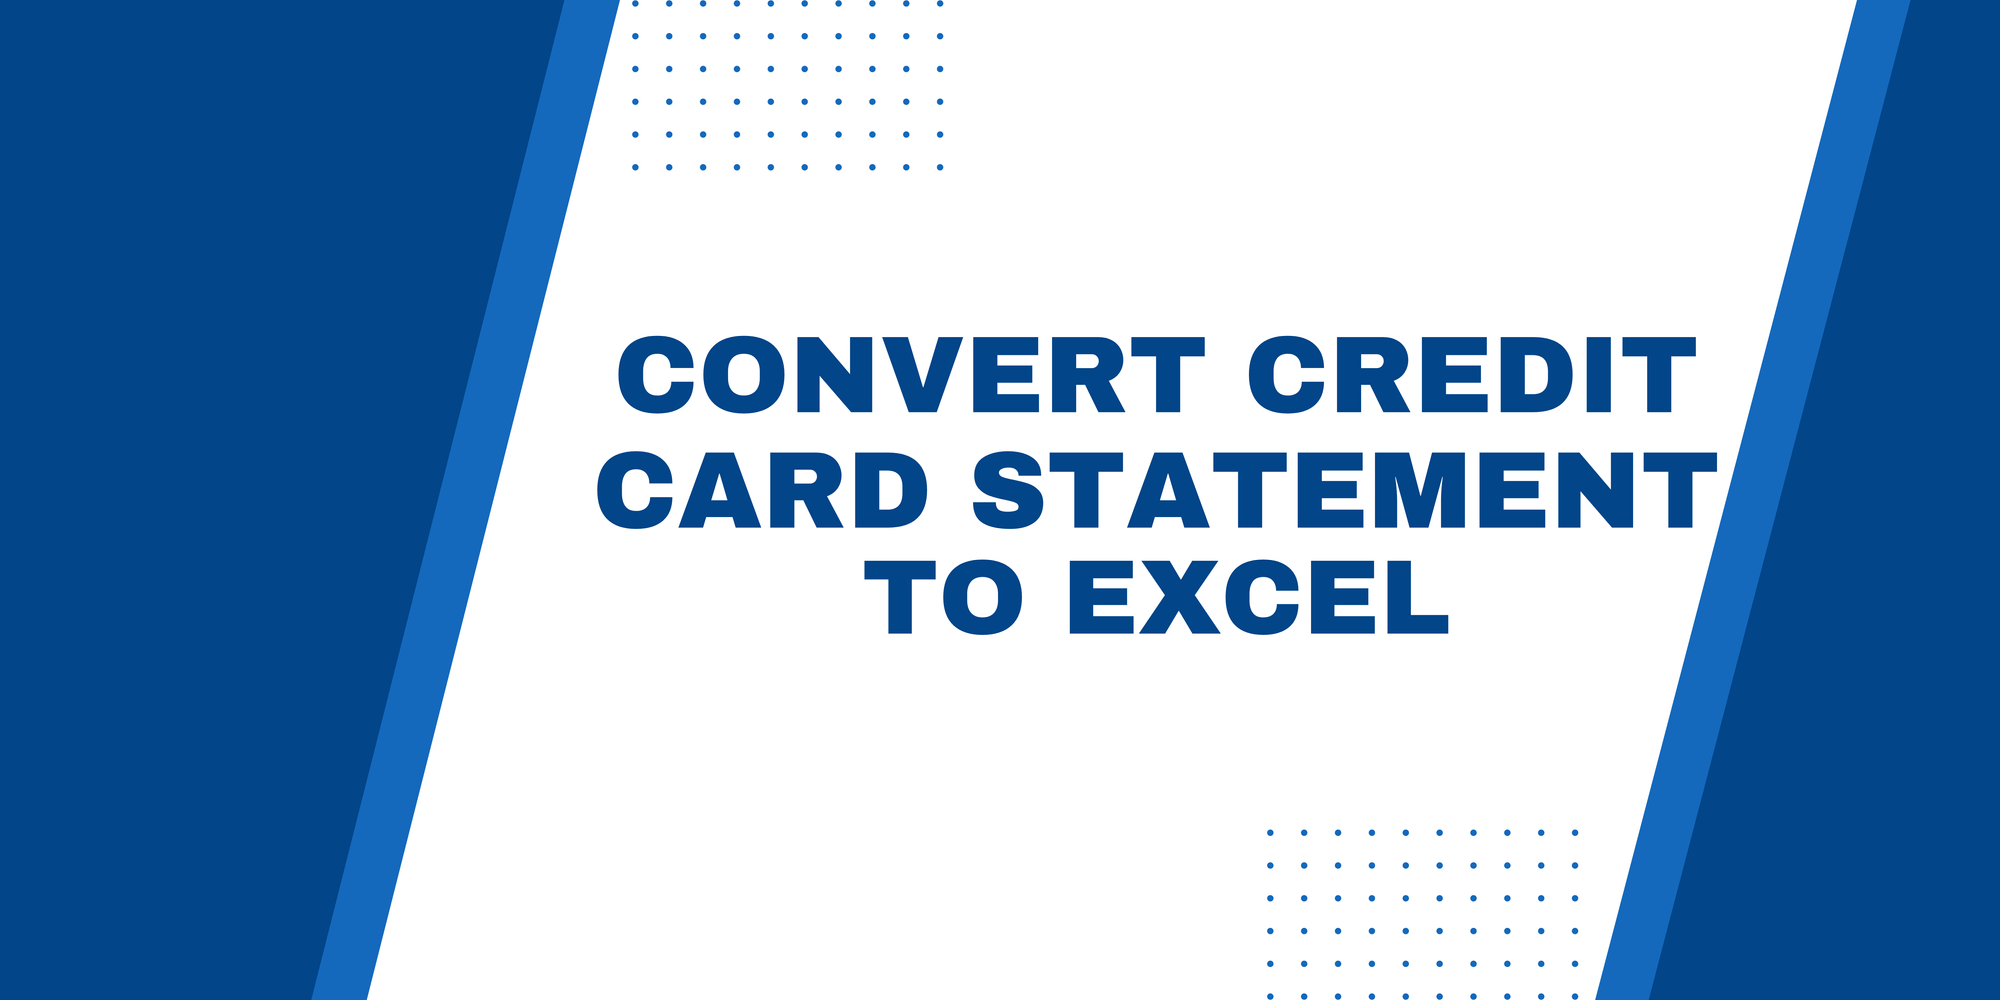 Convert Credit Card Statement to Excel